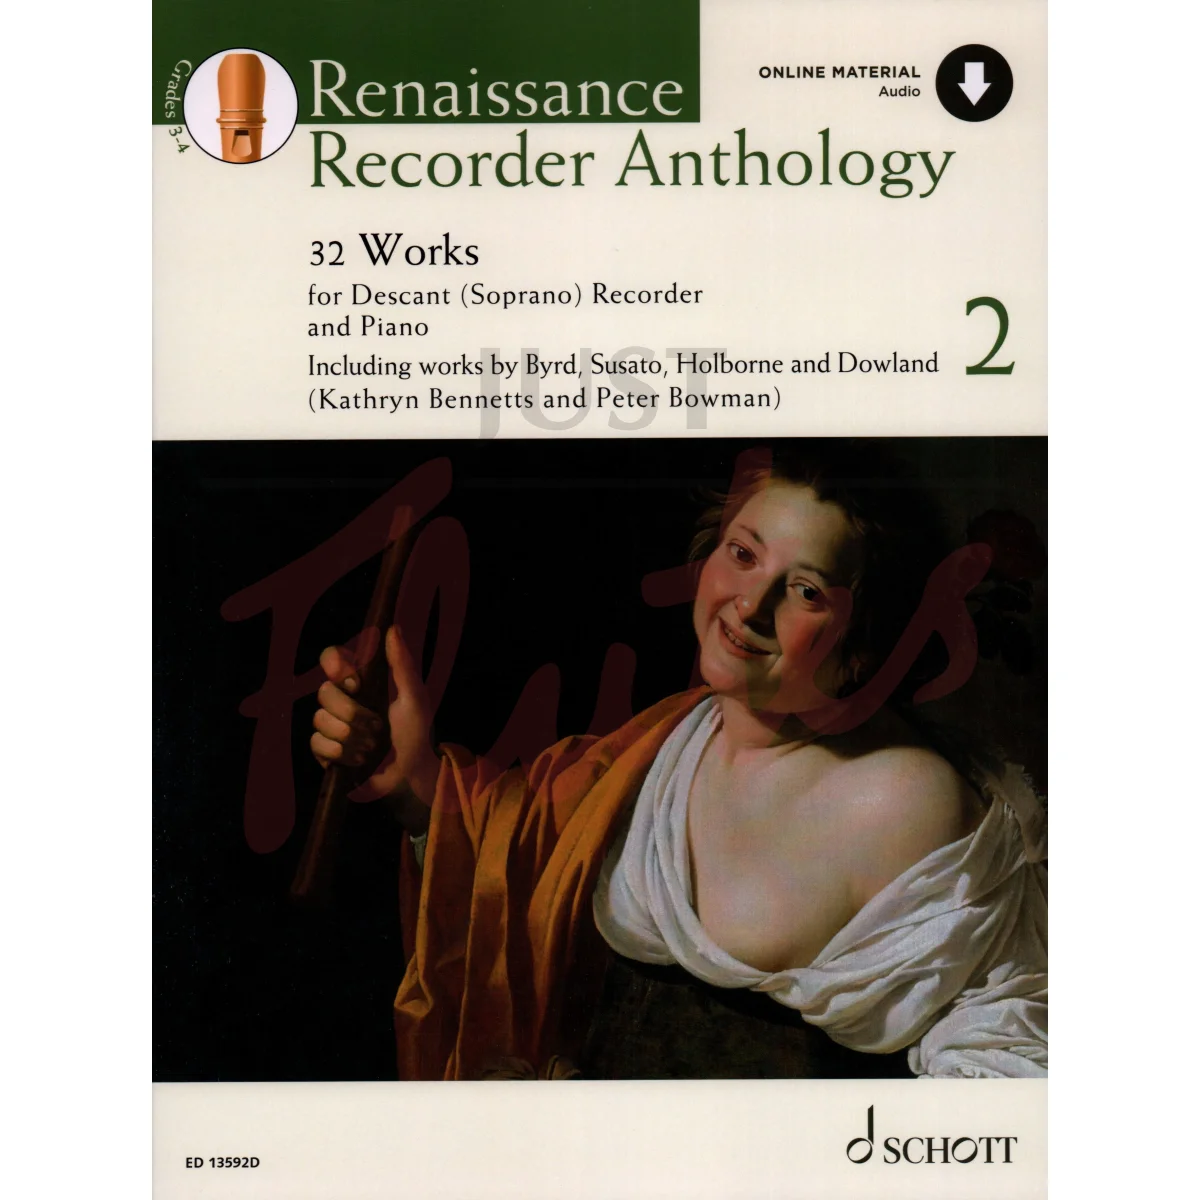 Renaissance Recorder Anthology for Descant Recorder and Piano, Vol. 2